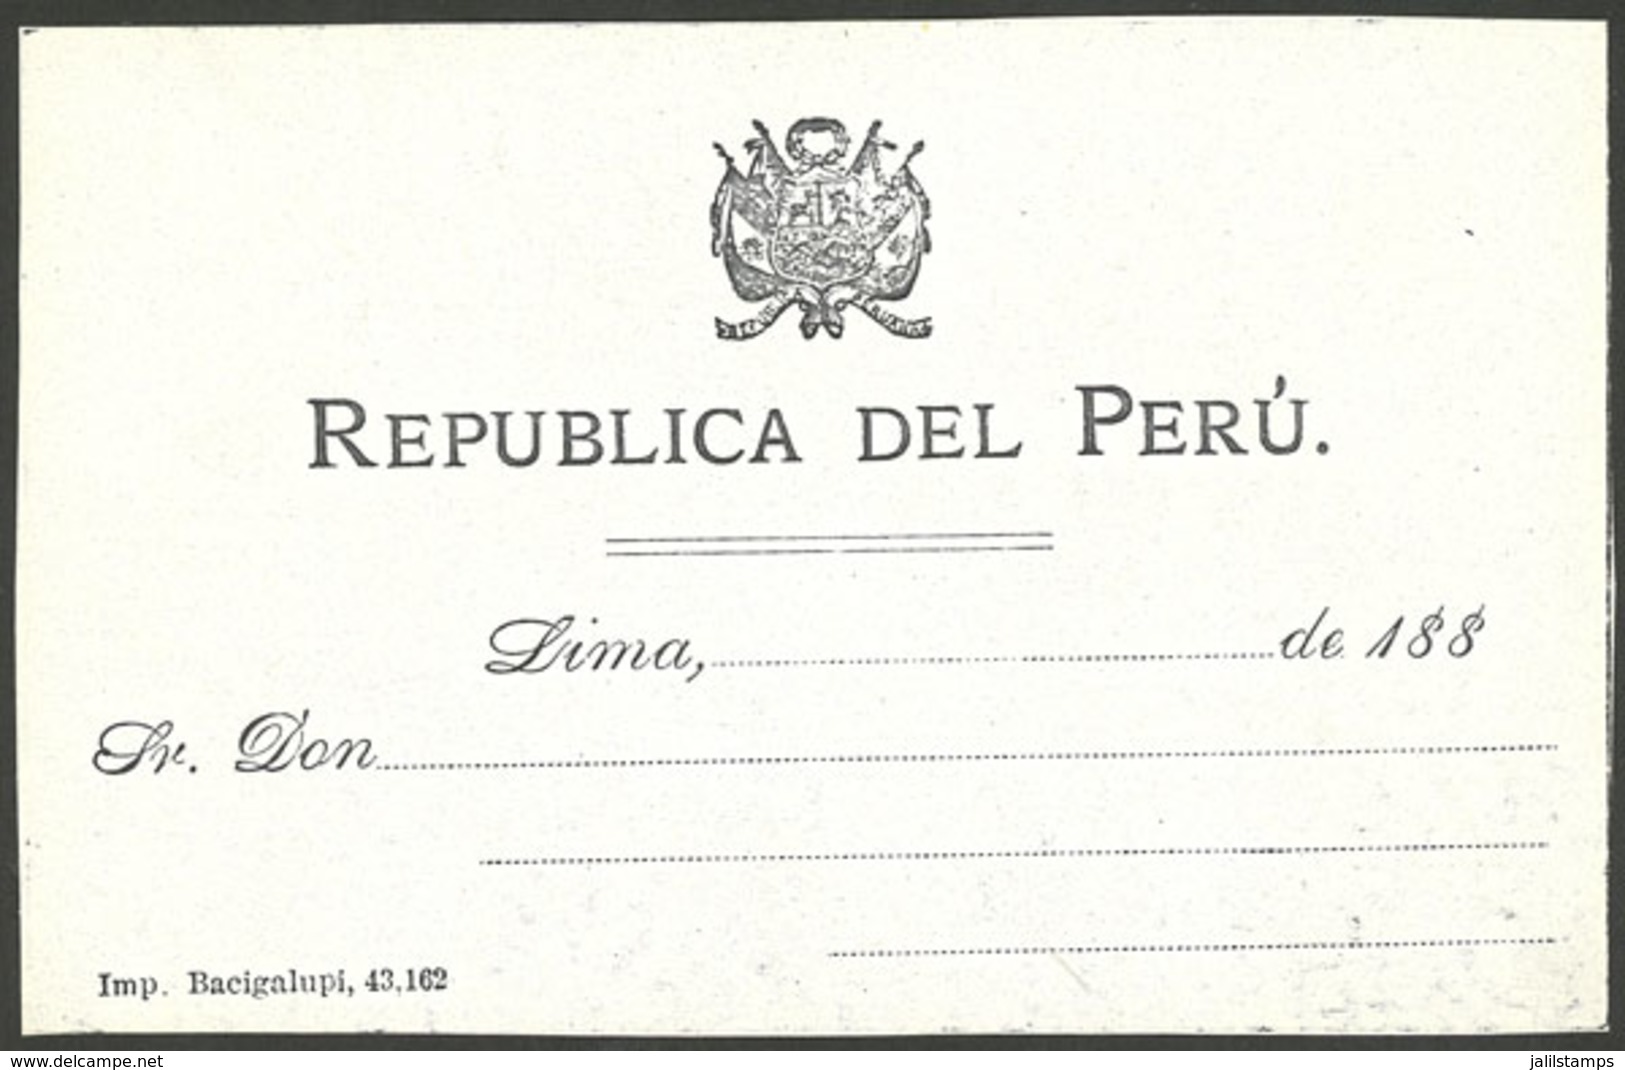 PERU: Unused Form For Sending Official Parcel Post, Very Old (circa 1880), Printed By Imprenta Bacigalupi, Rare! Ex-Herb - Sin Clasificación